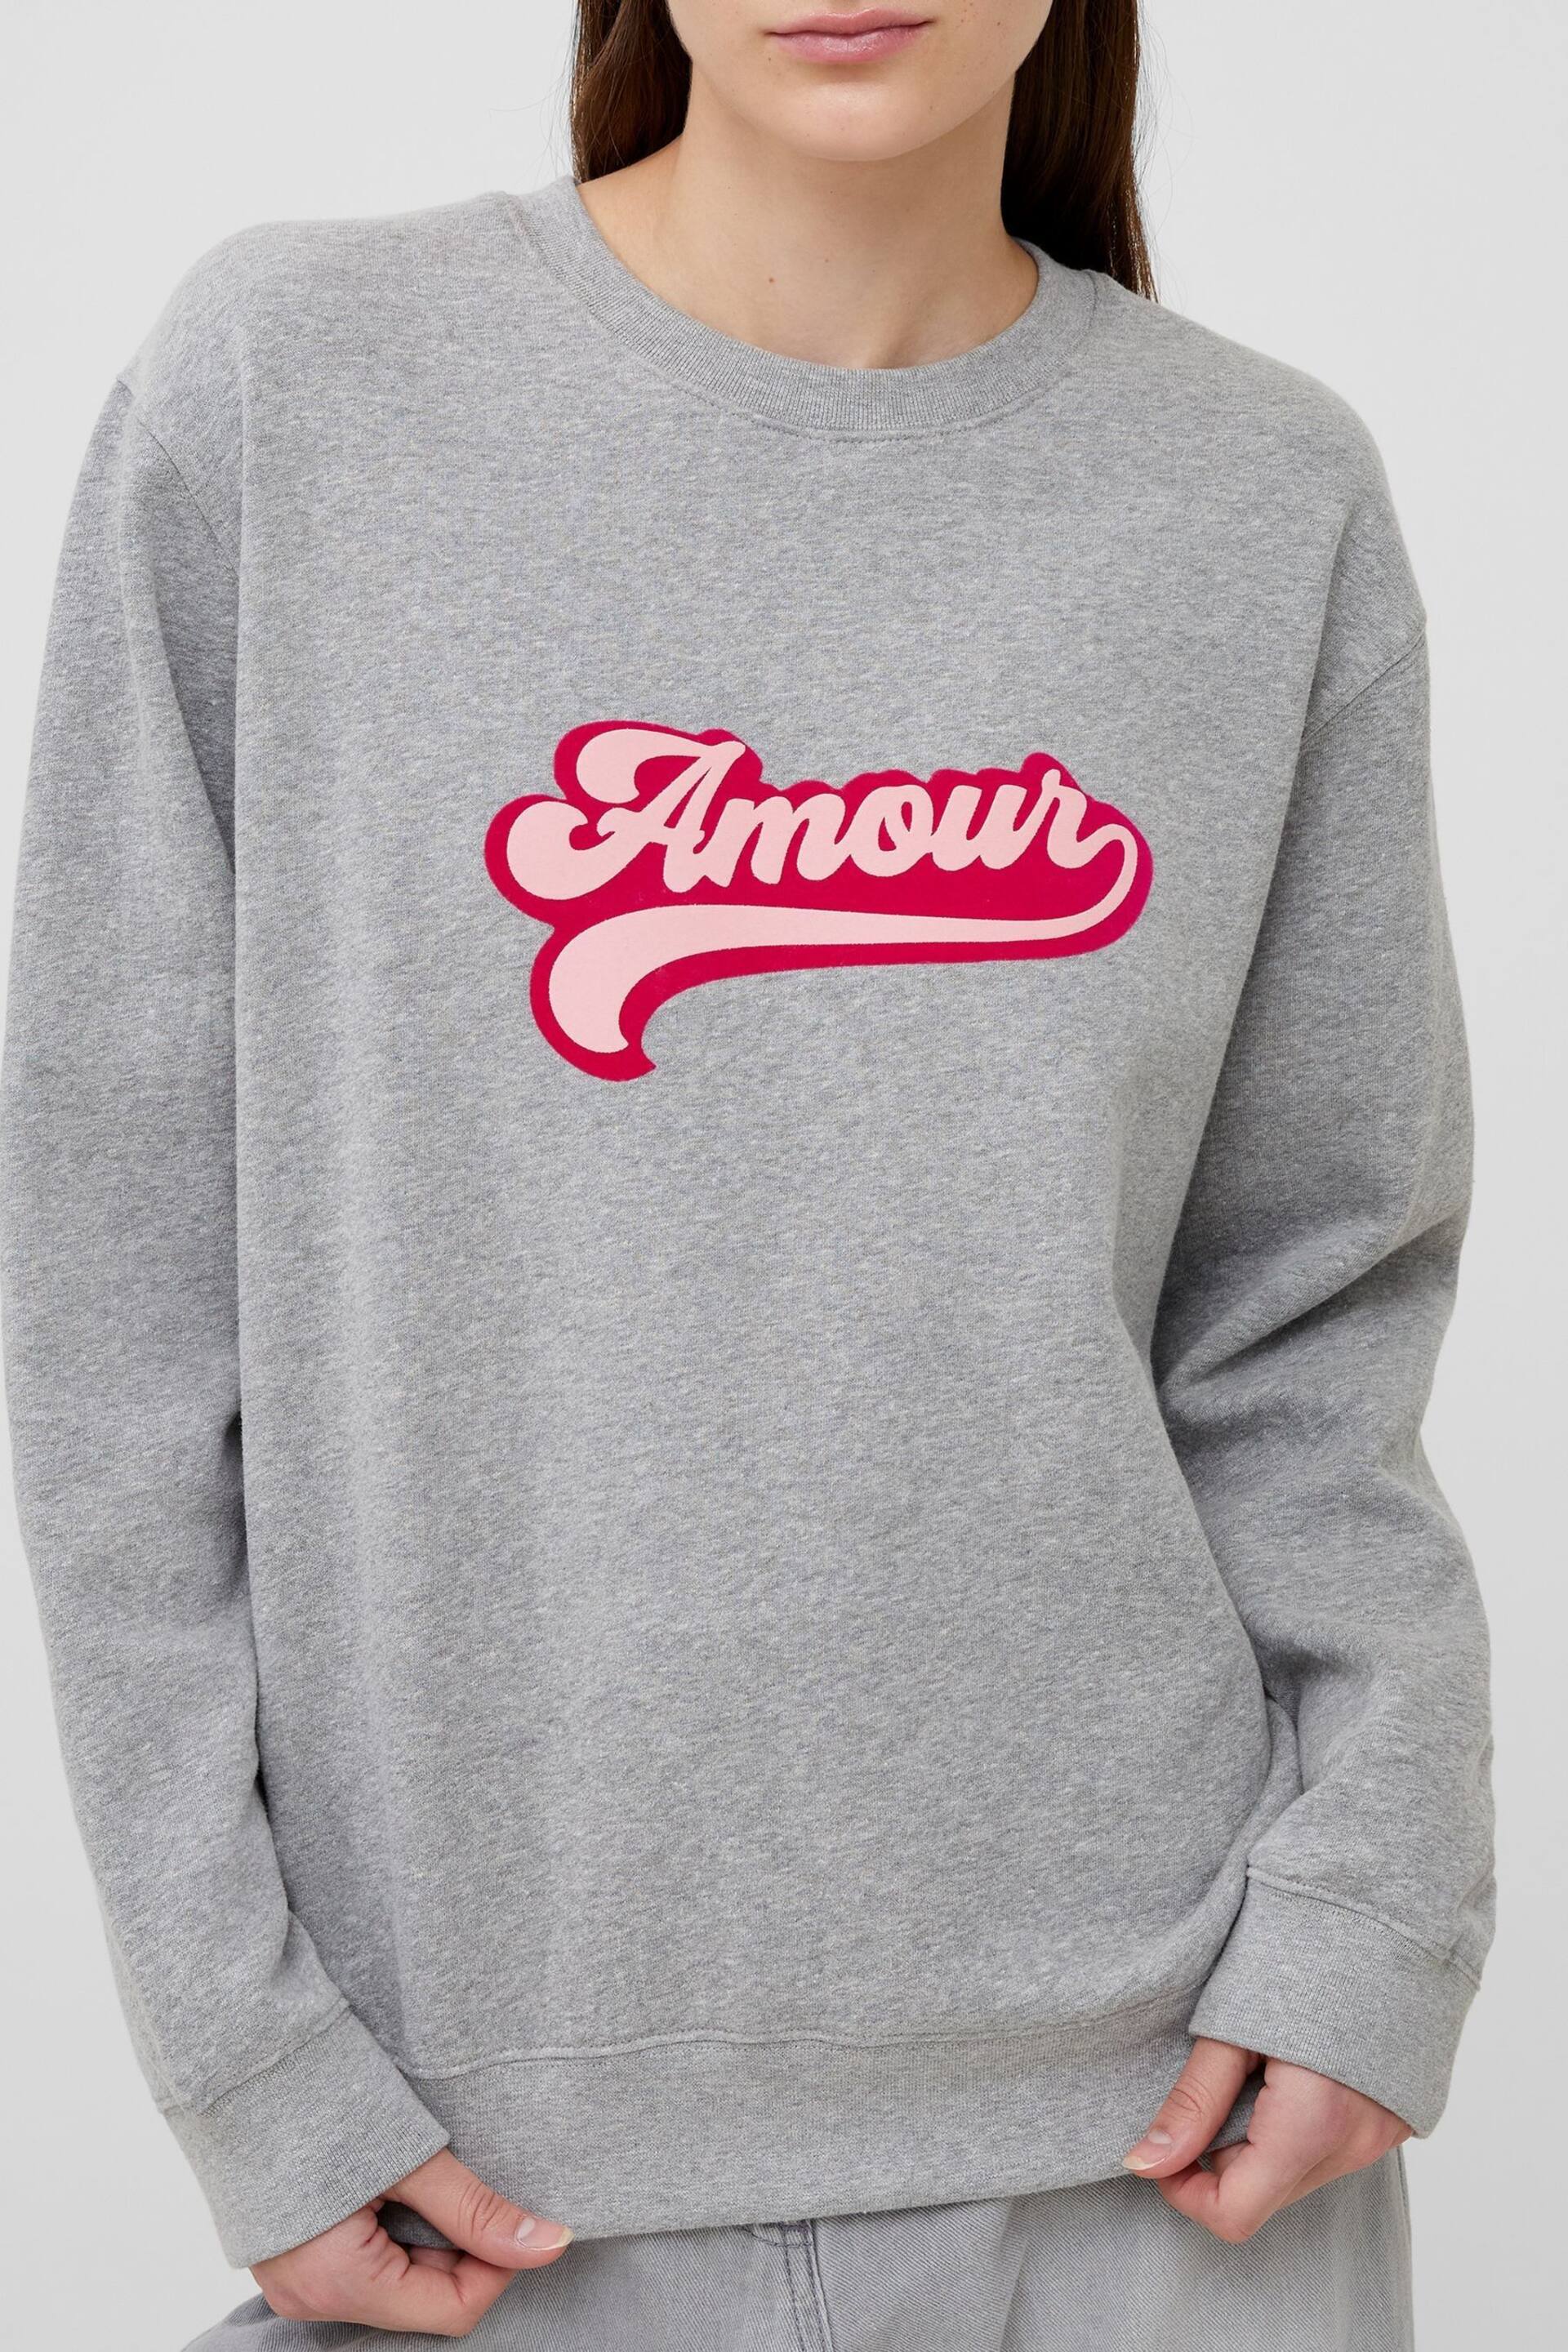 French Connection Amour Graphic Sweatshirt - Image 3 of 4